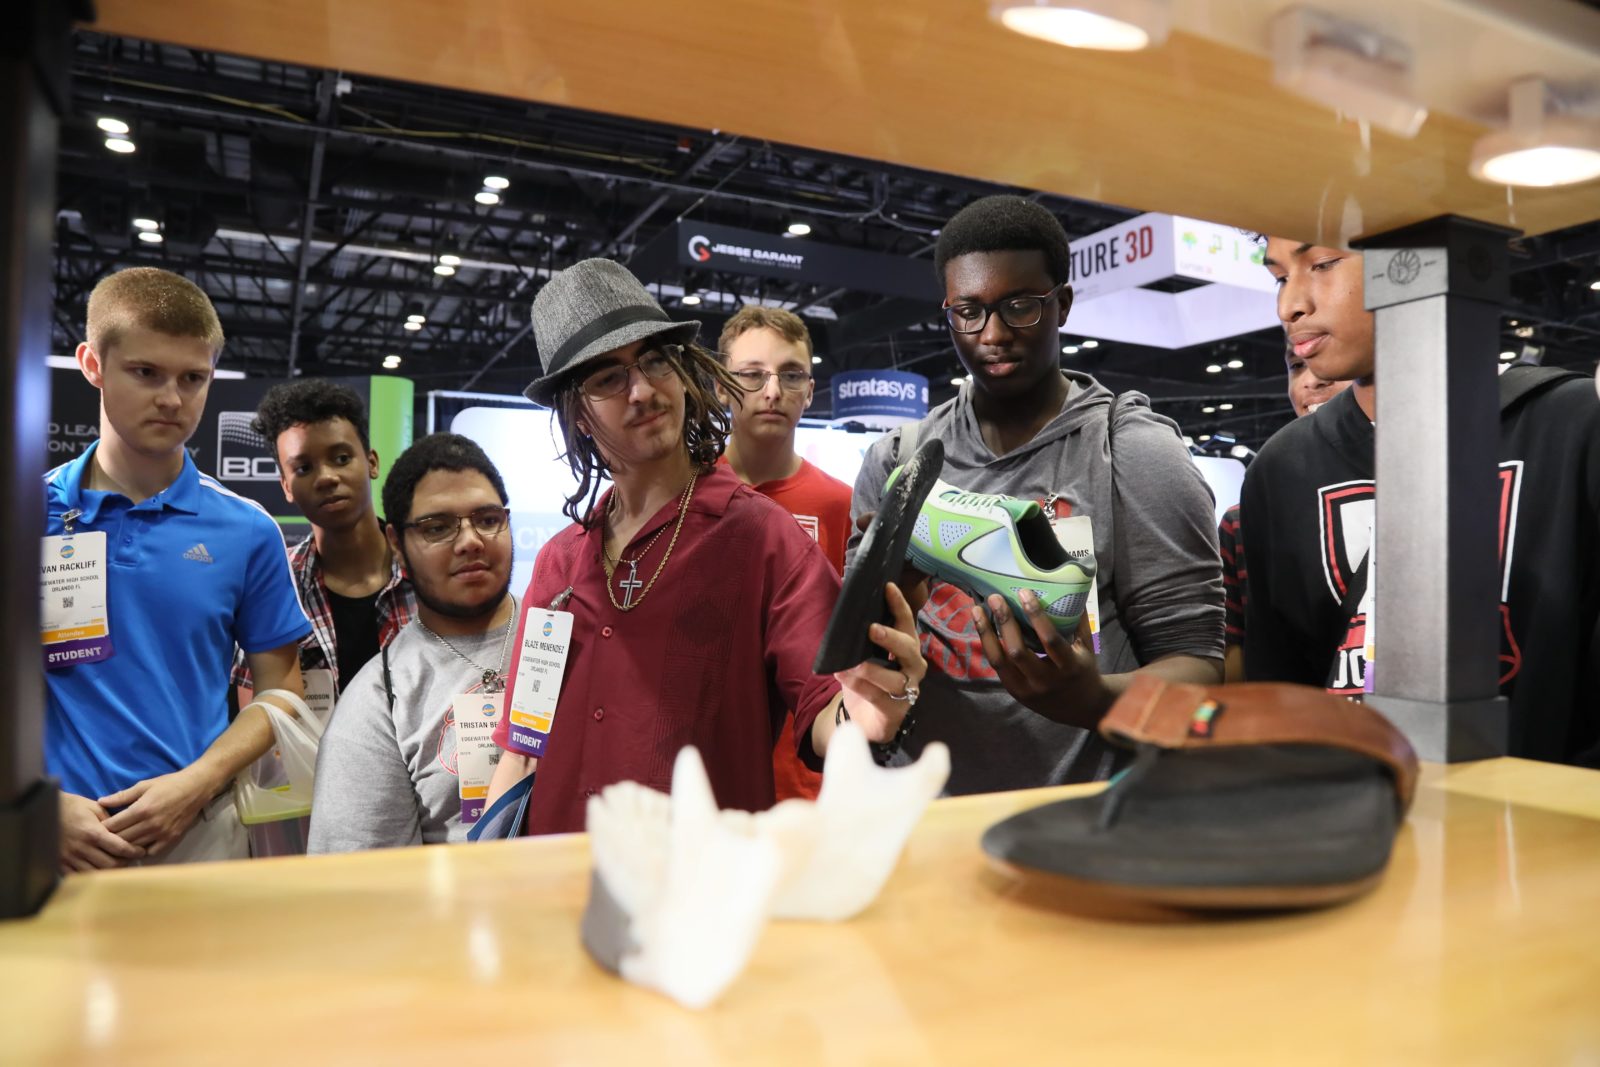 A group looks at an exhibit in the 3D/4D Printing zone